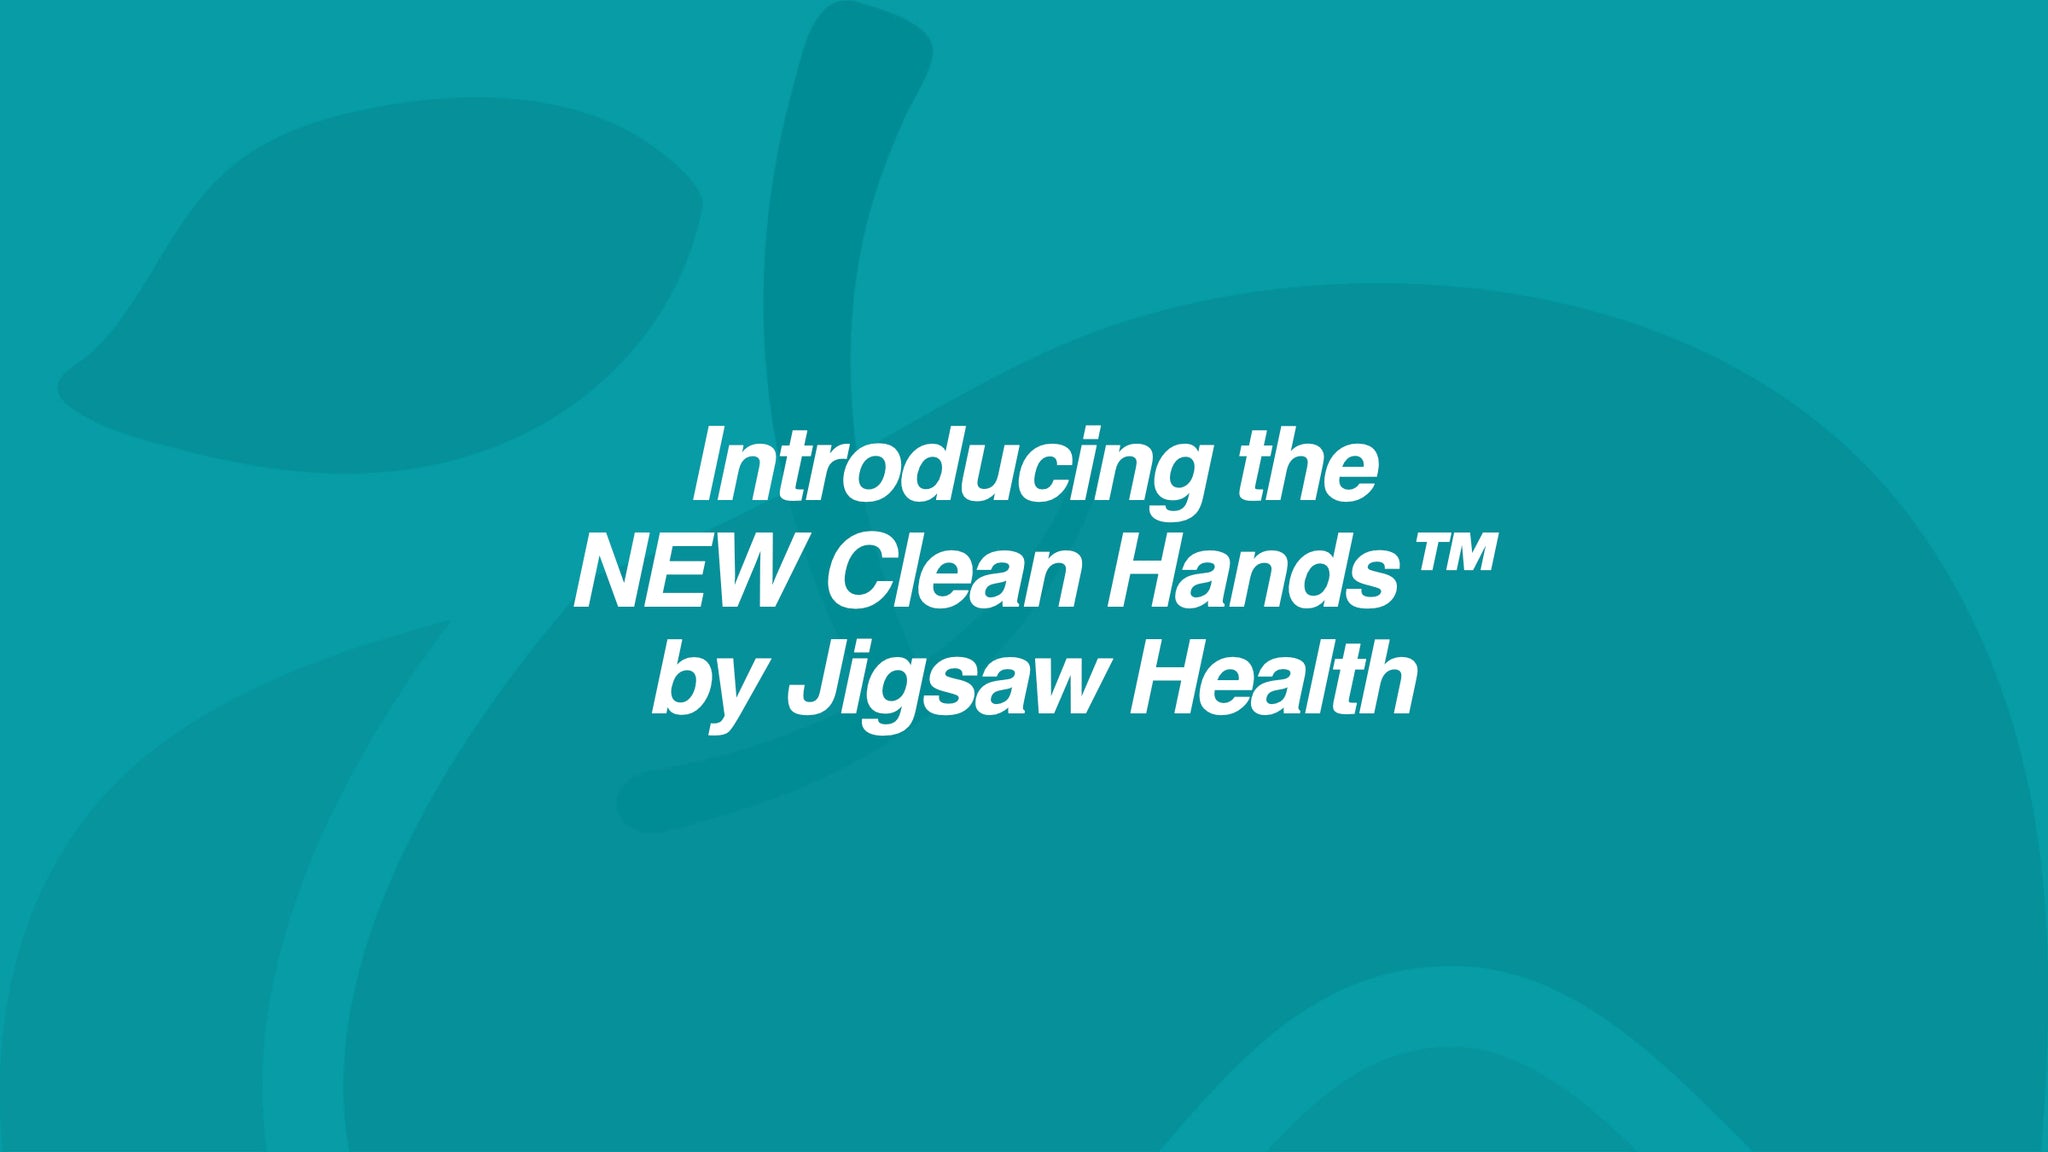 Introducing the NEW Clean Hands™ from Jigsaw Health...